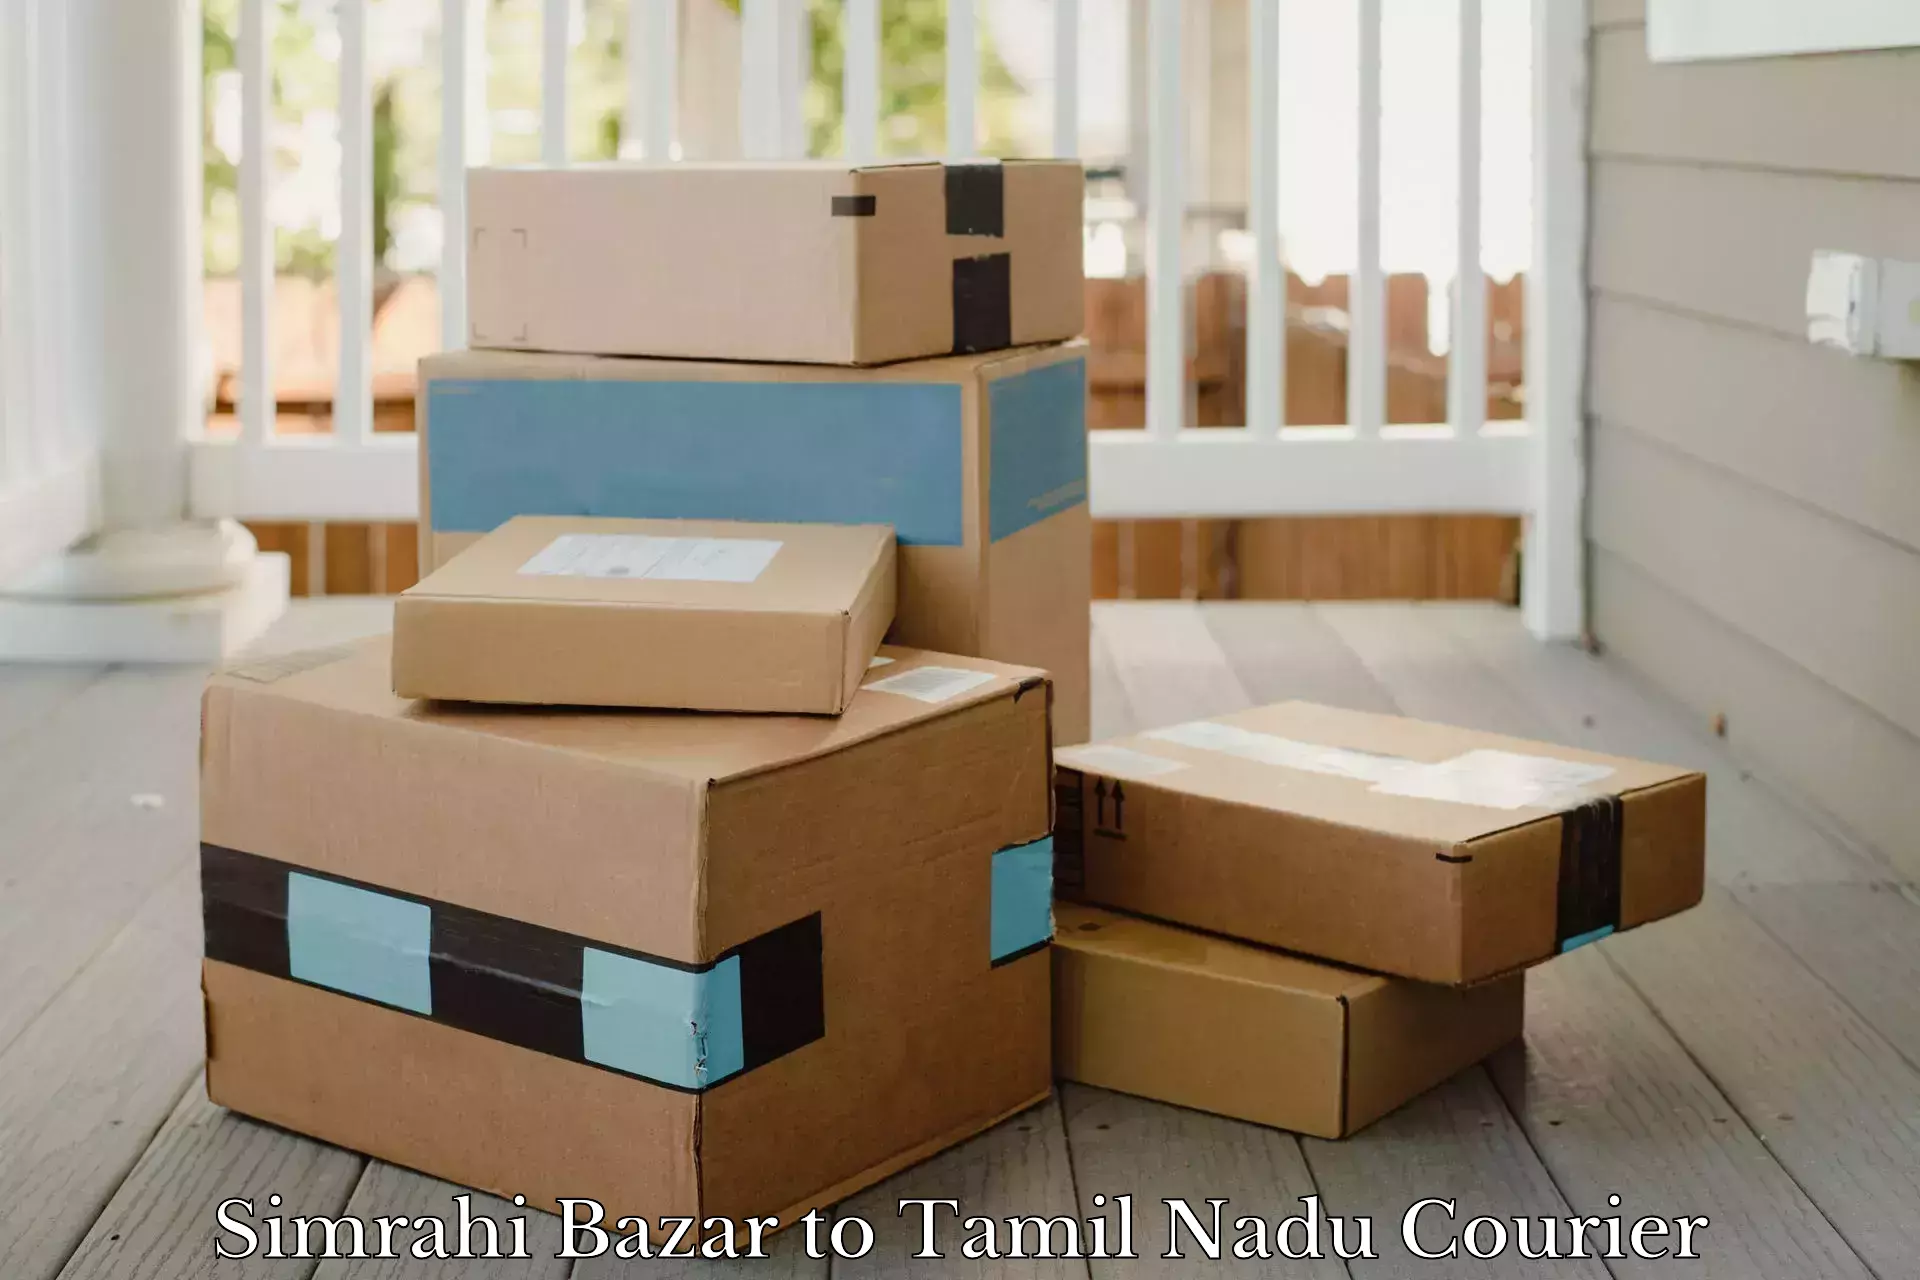 Easy access courier services in Simrahi Bazar to Omalur